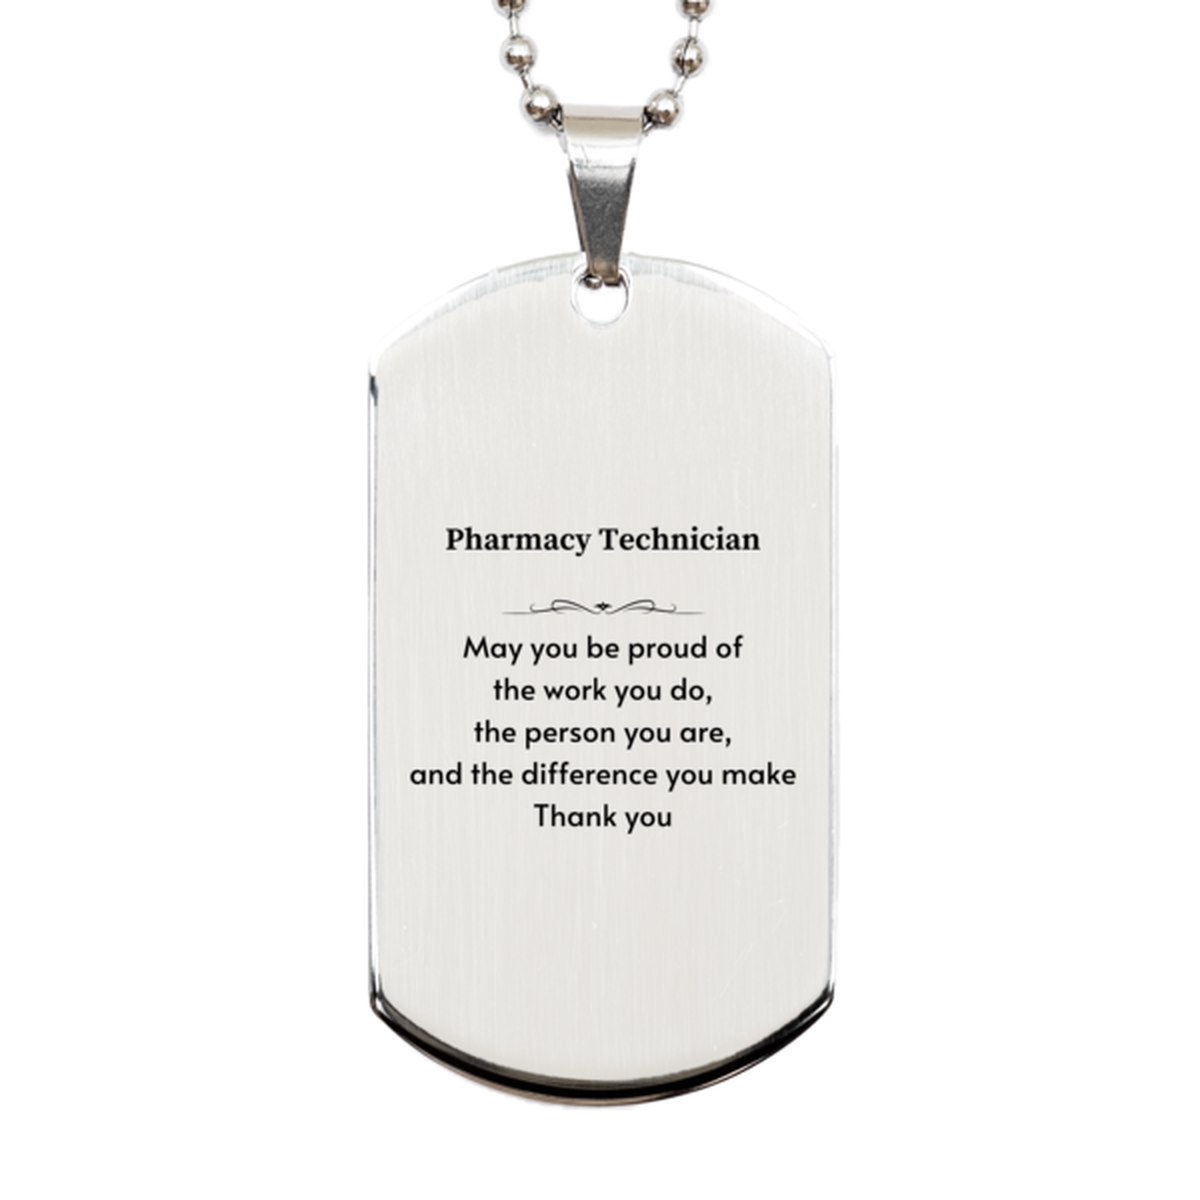 Heartwarming Silver Dog Tag Retirement Coworkers Gifts for Pharmacy Technician, Pharmacy Technician May You be proud of the work you do, the person you are Gifts for Boss Men Women Friends